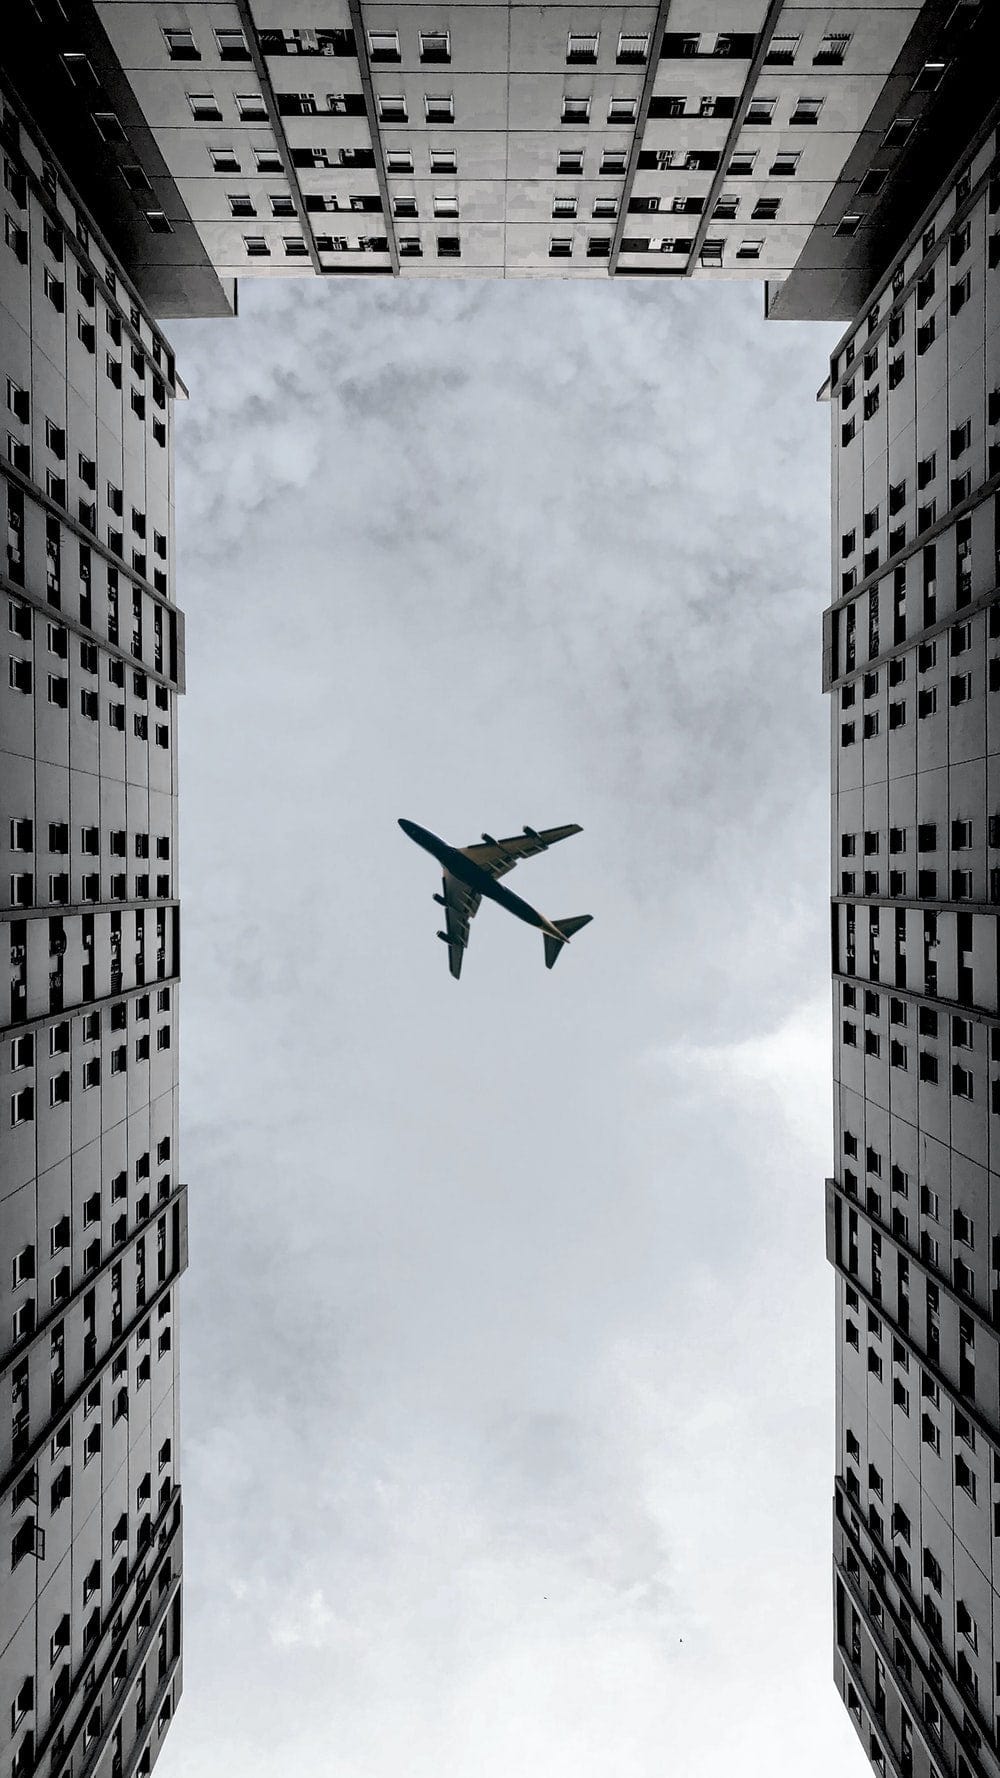 Cross Stitch | Surabaya - Airplane Flying Over The Building During Daytime - Cross Stitched